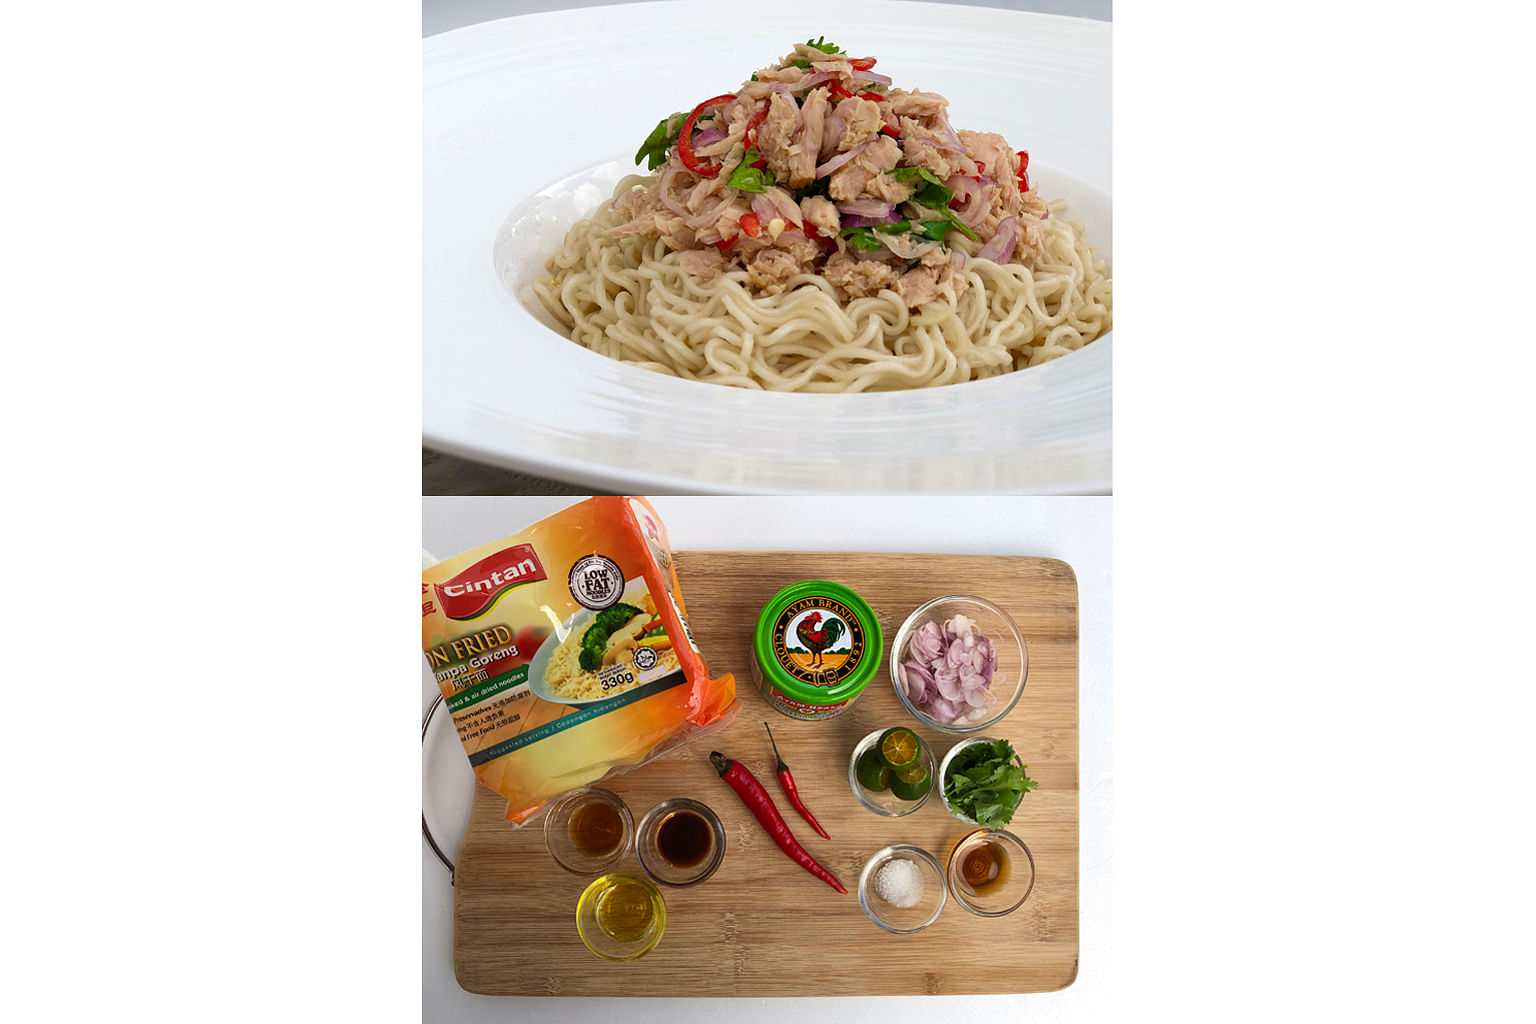 This Thai-inspired dish can be made using canned tuna chunks and non-fried instant noodles.